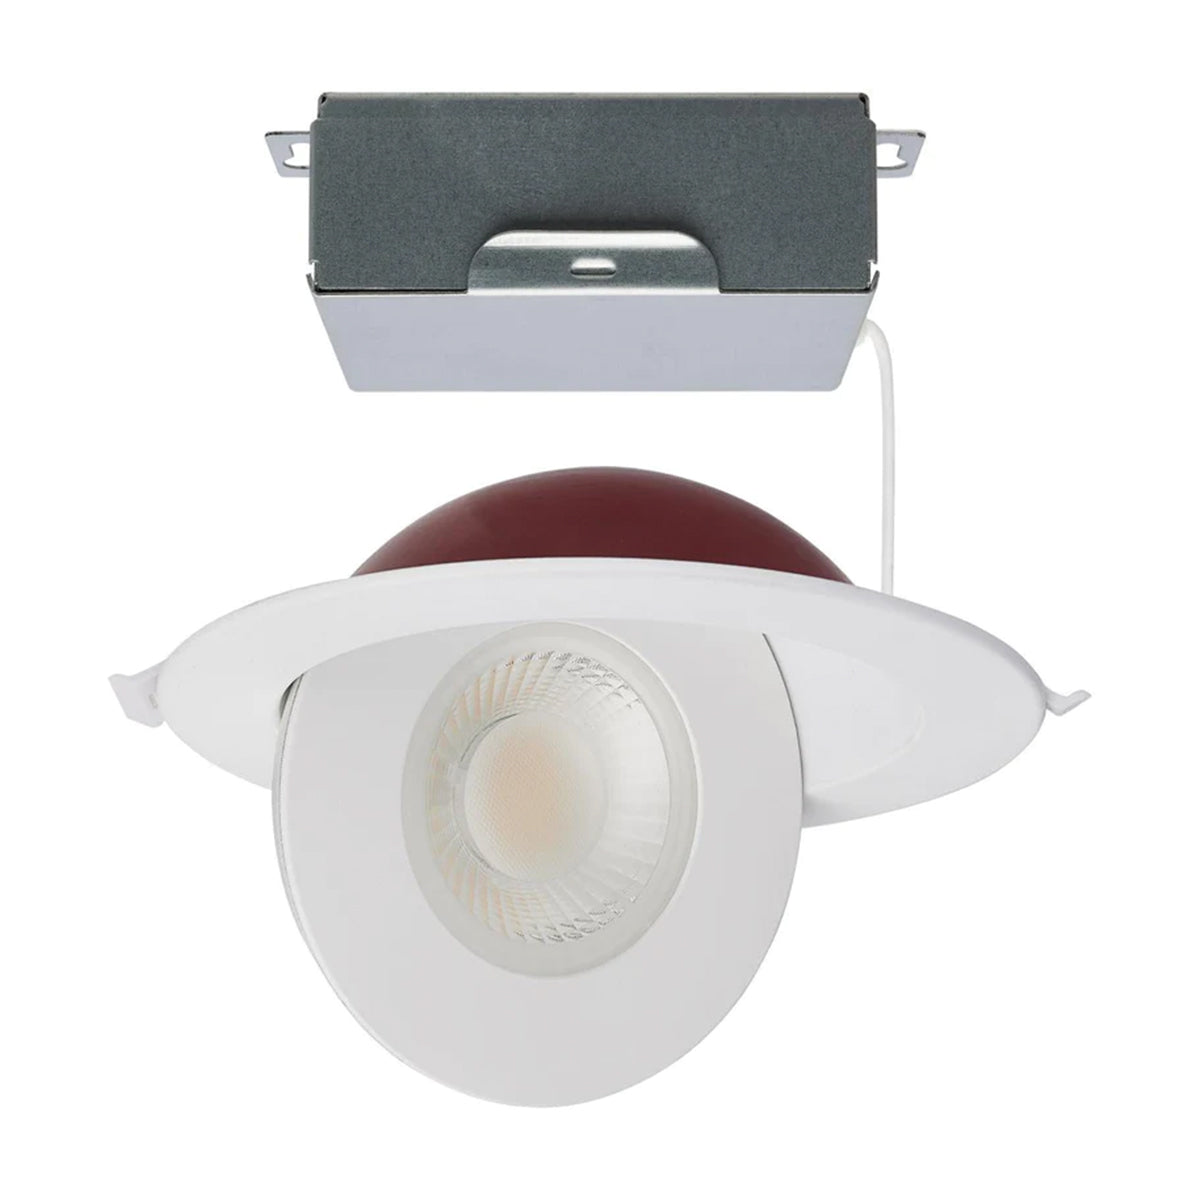 6 Inch Round LED Fire Rated Directional Downlight, 15 Watt, 1280 Lumens, Selectable CCT 2700K to 5000K, Adjustable Trim, White Finish